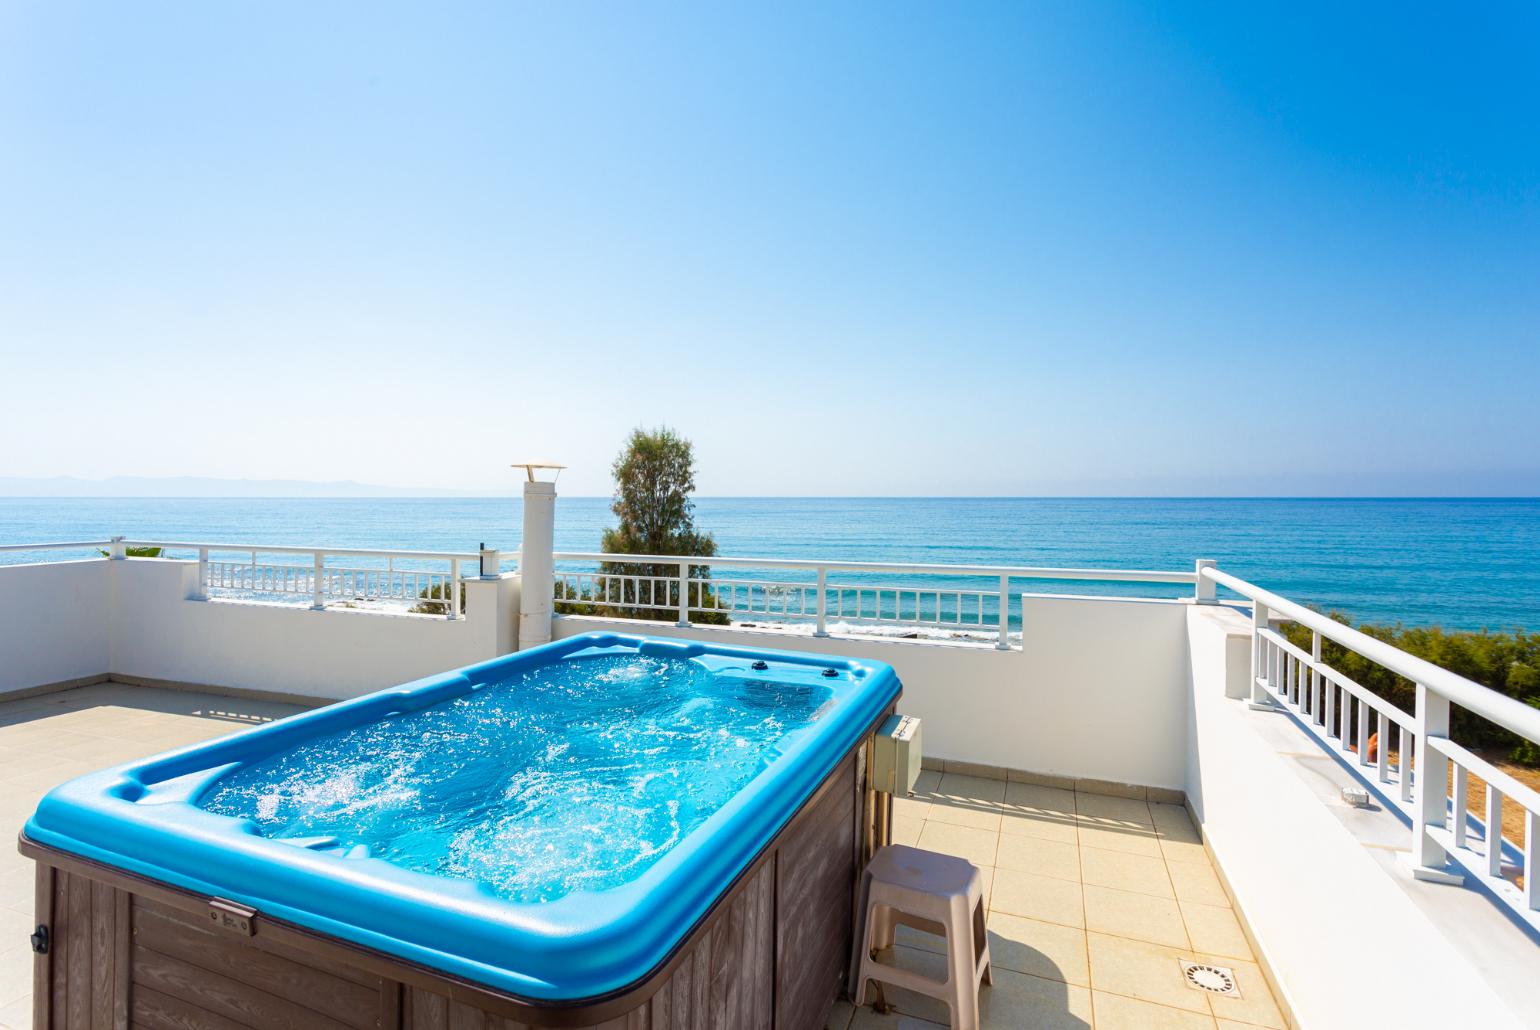 Roof terrace area with jacuzzi and panoramic sea views